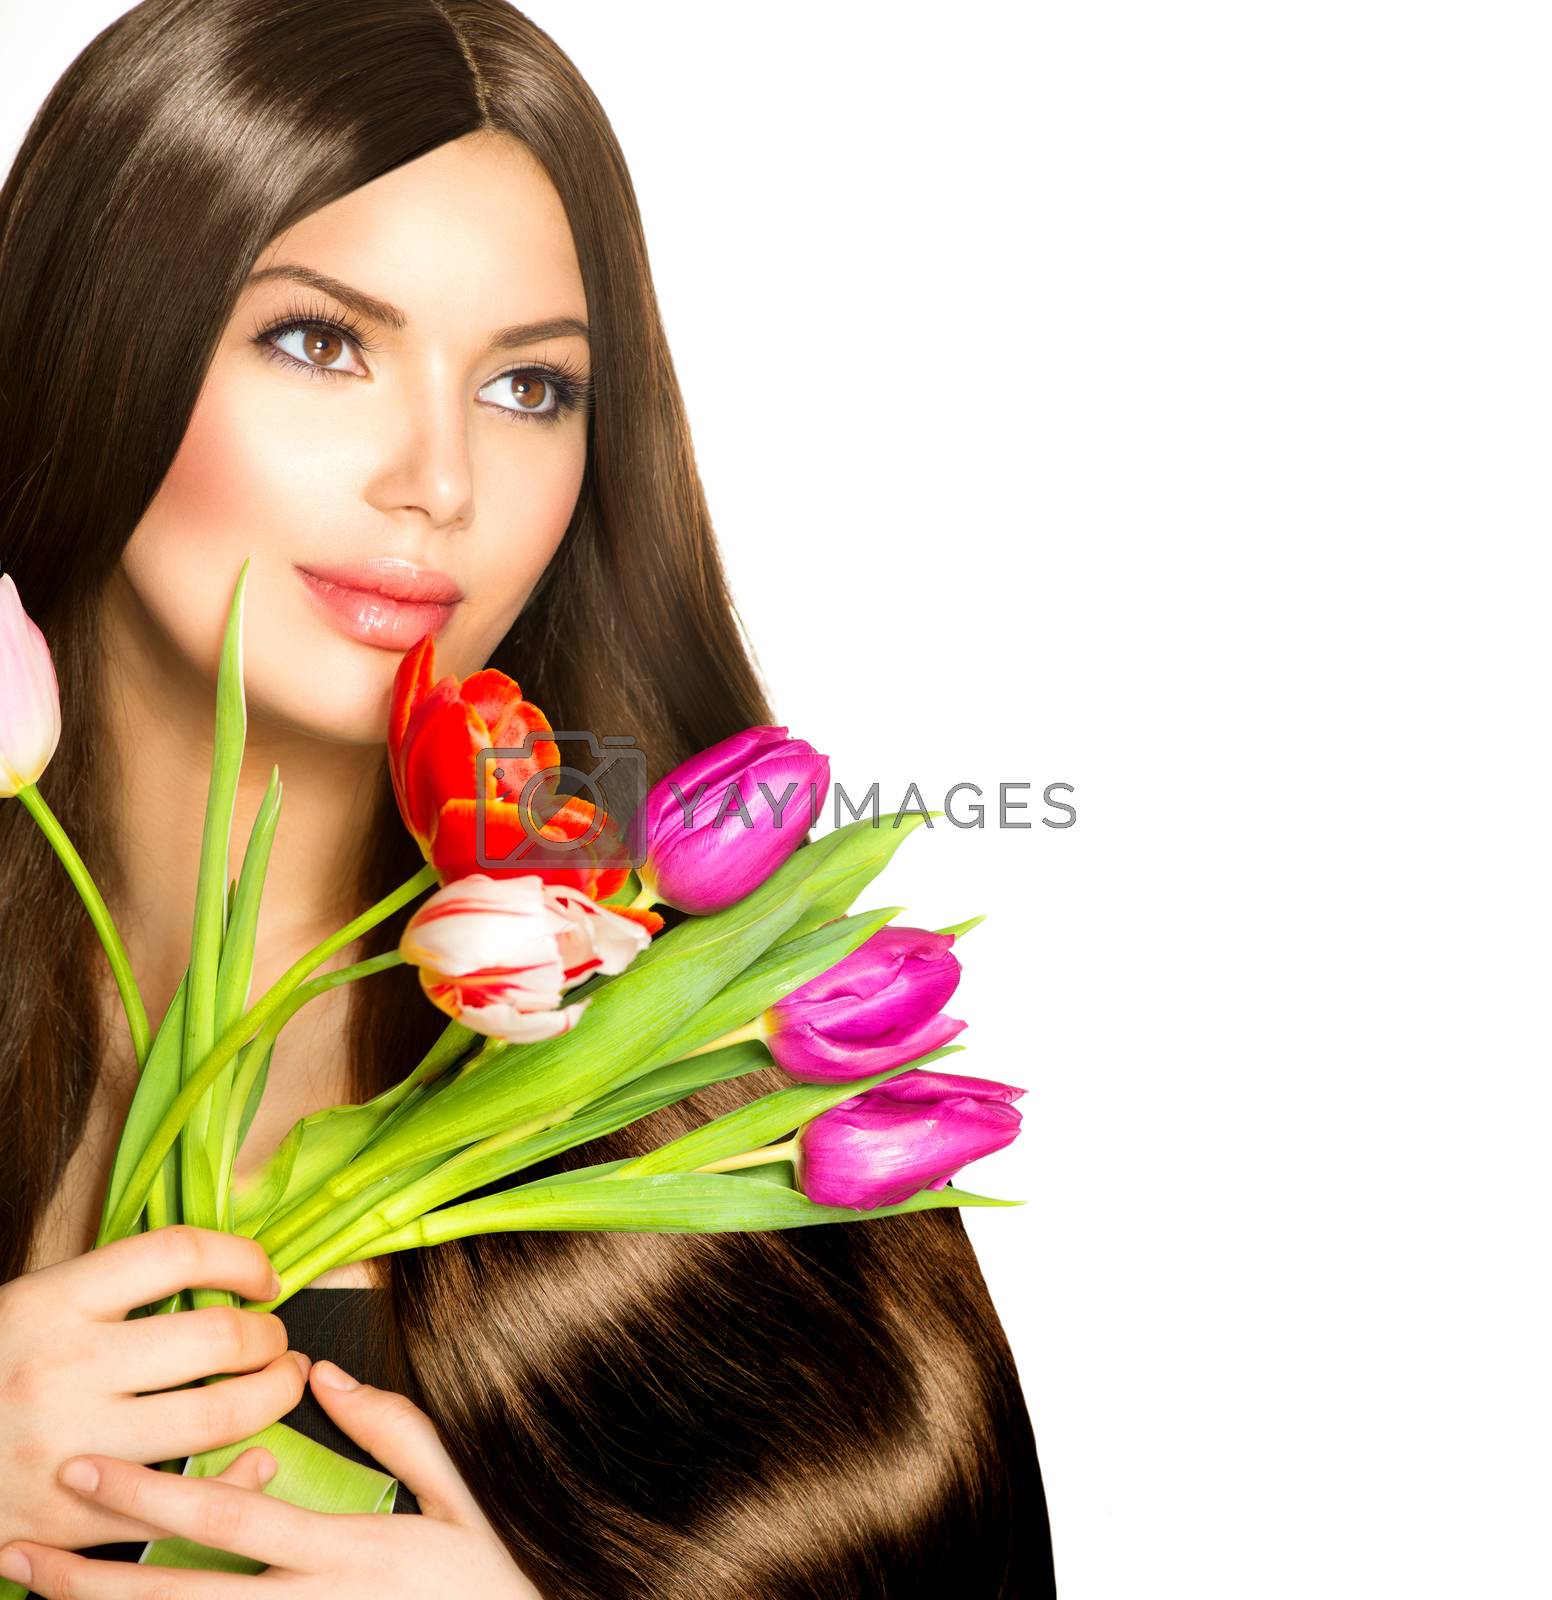 Royalty free image of Beauty Woman with Spring Bouquet of Tulip Flowers by SubbotinaA